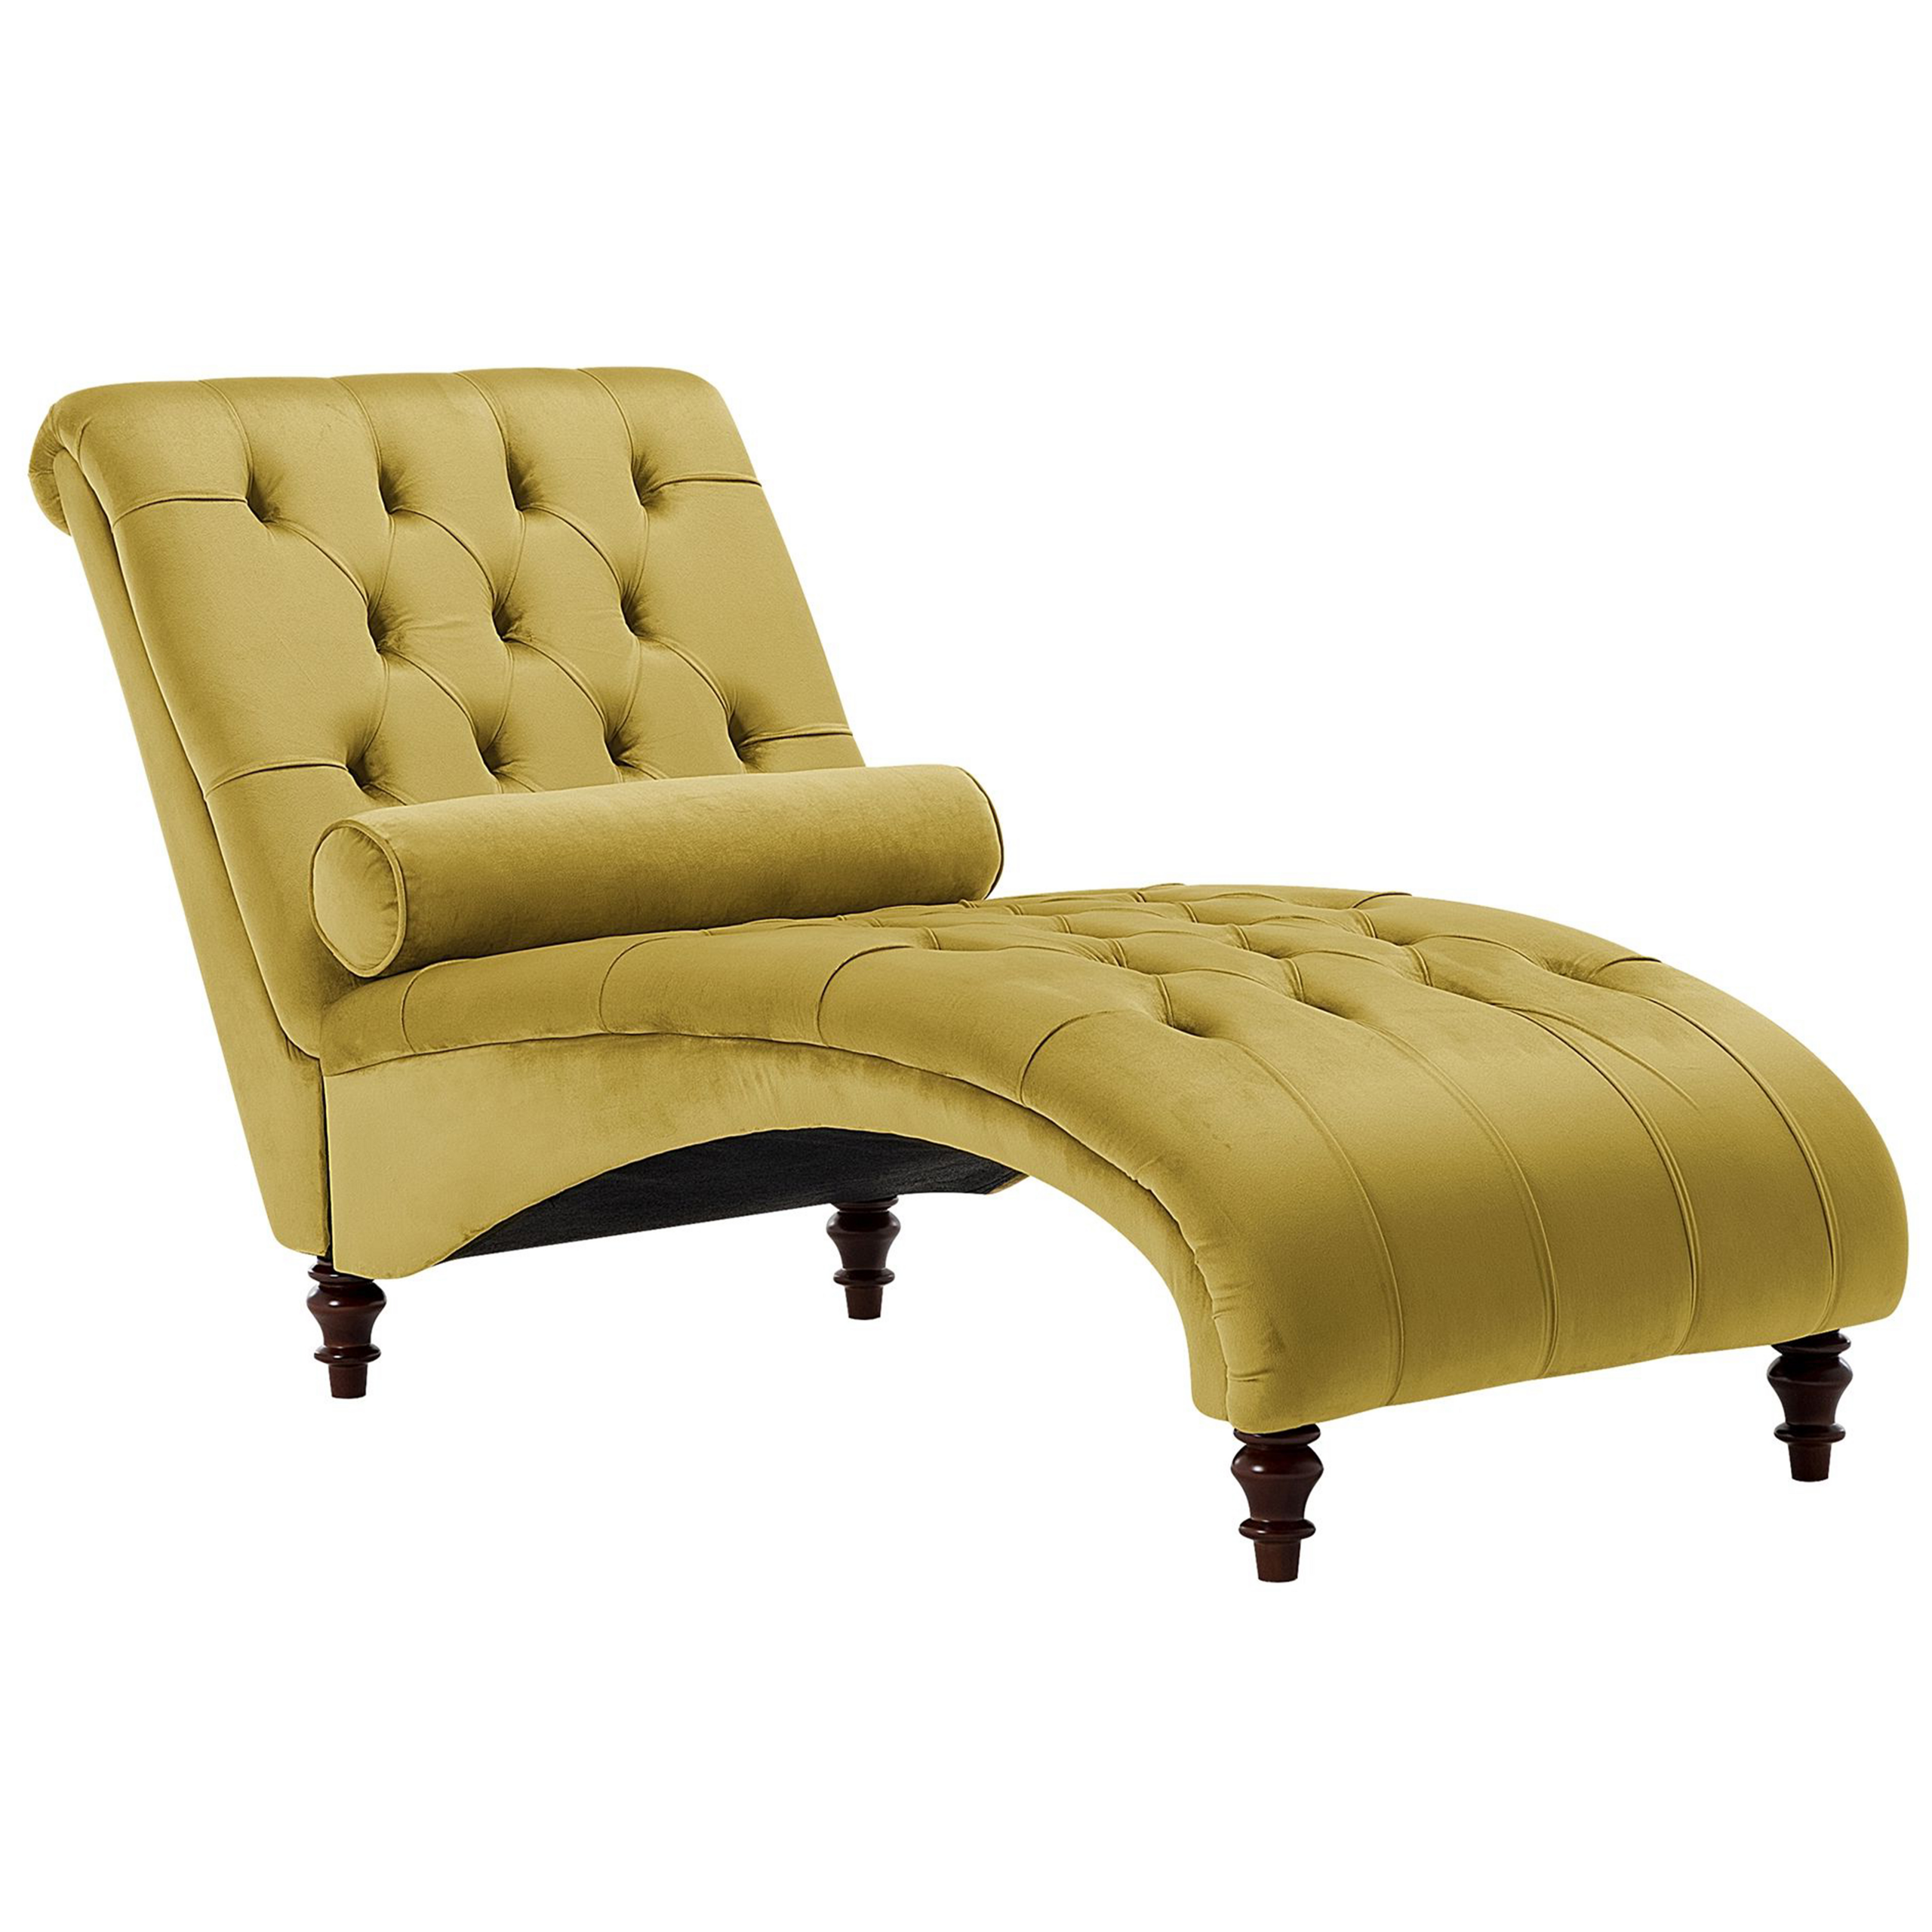 Beliani Chaise Lounge Mustard Yellow Velvet Chesterfield Buttoned Modern Living Room Chaise Wooden Legs